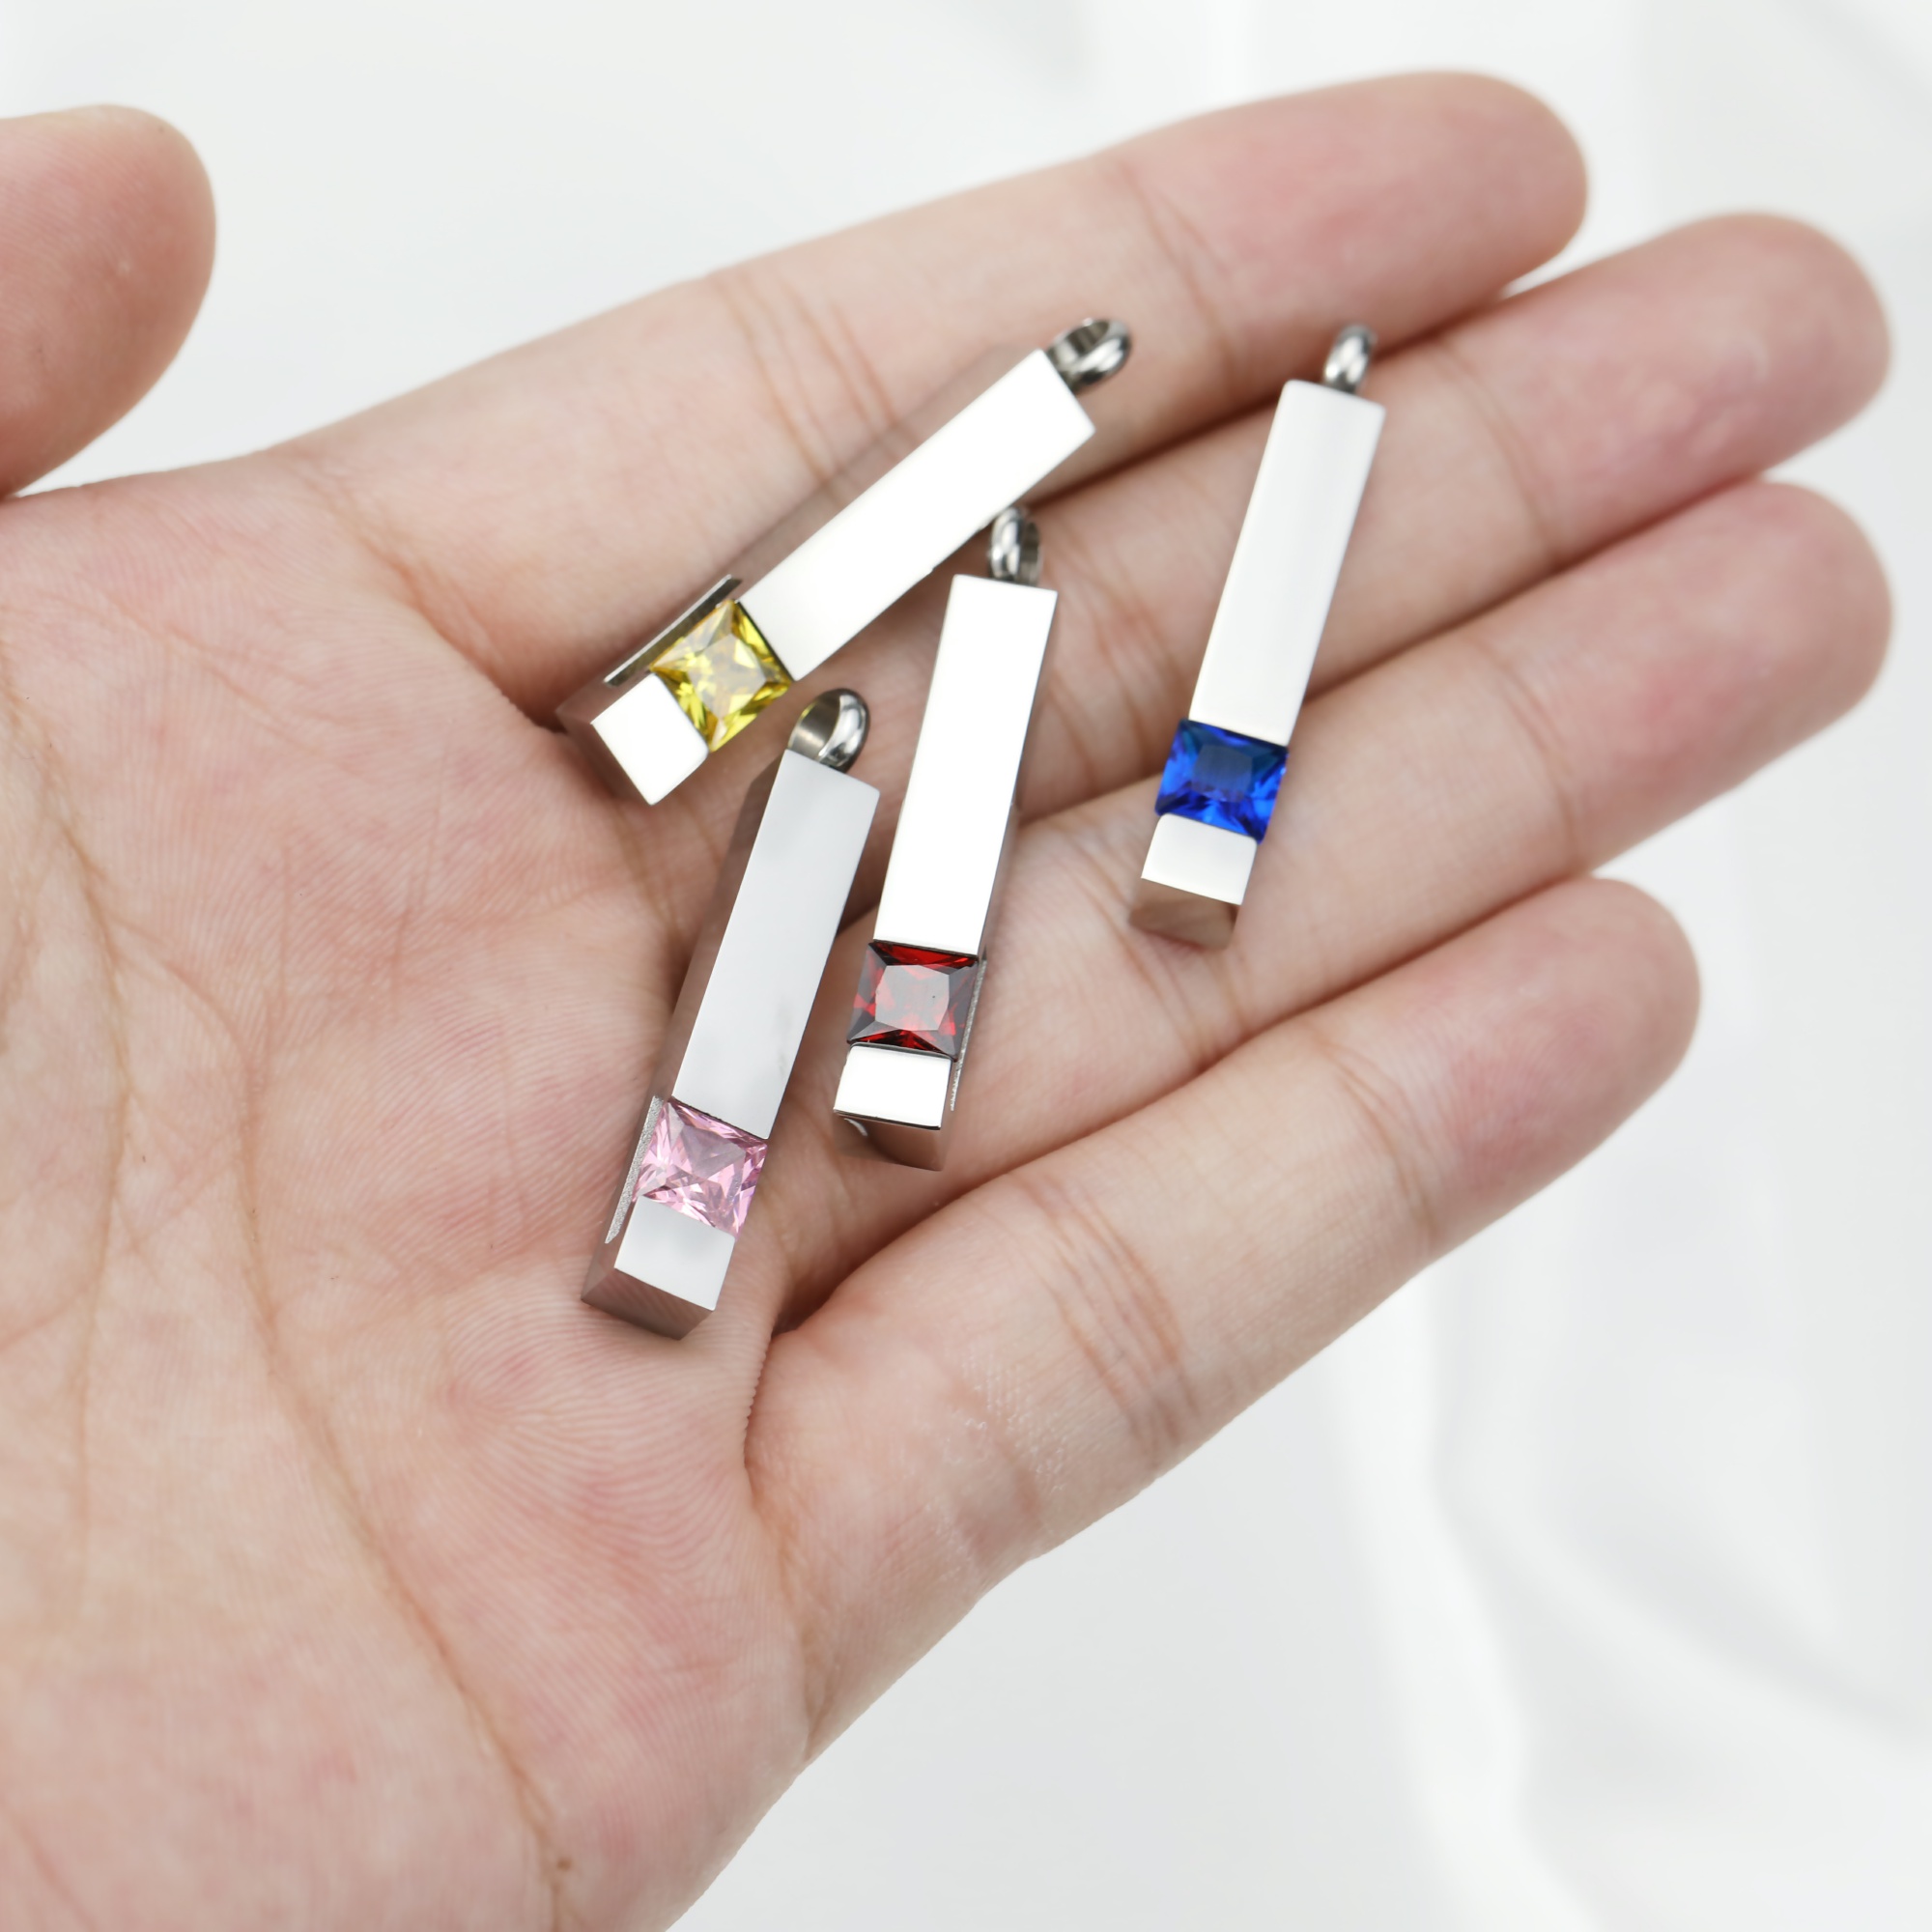 Keepsake Ash Canister Cremation Urn Set Color CZ Stone Birthstone Stick Stainless Steel Wish Vial Pendant Prayer Box 6x38MM 1190037 - Click Image to Close